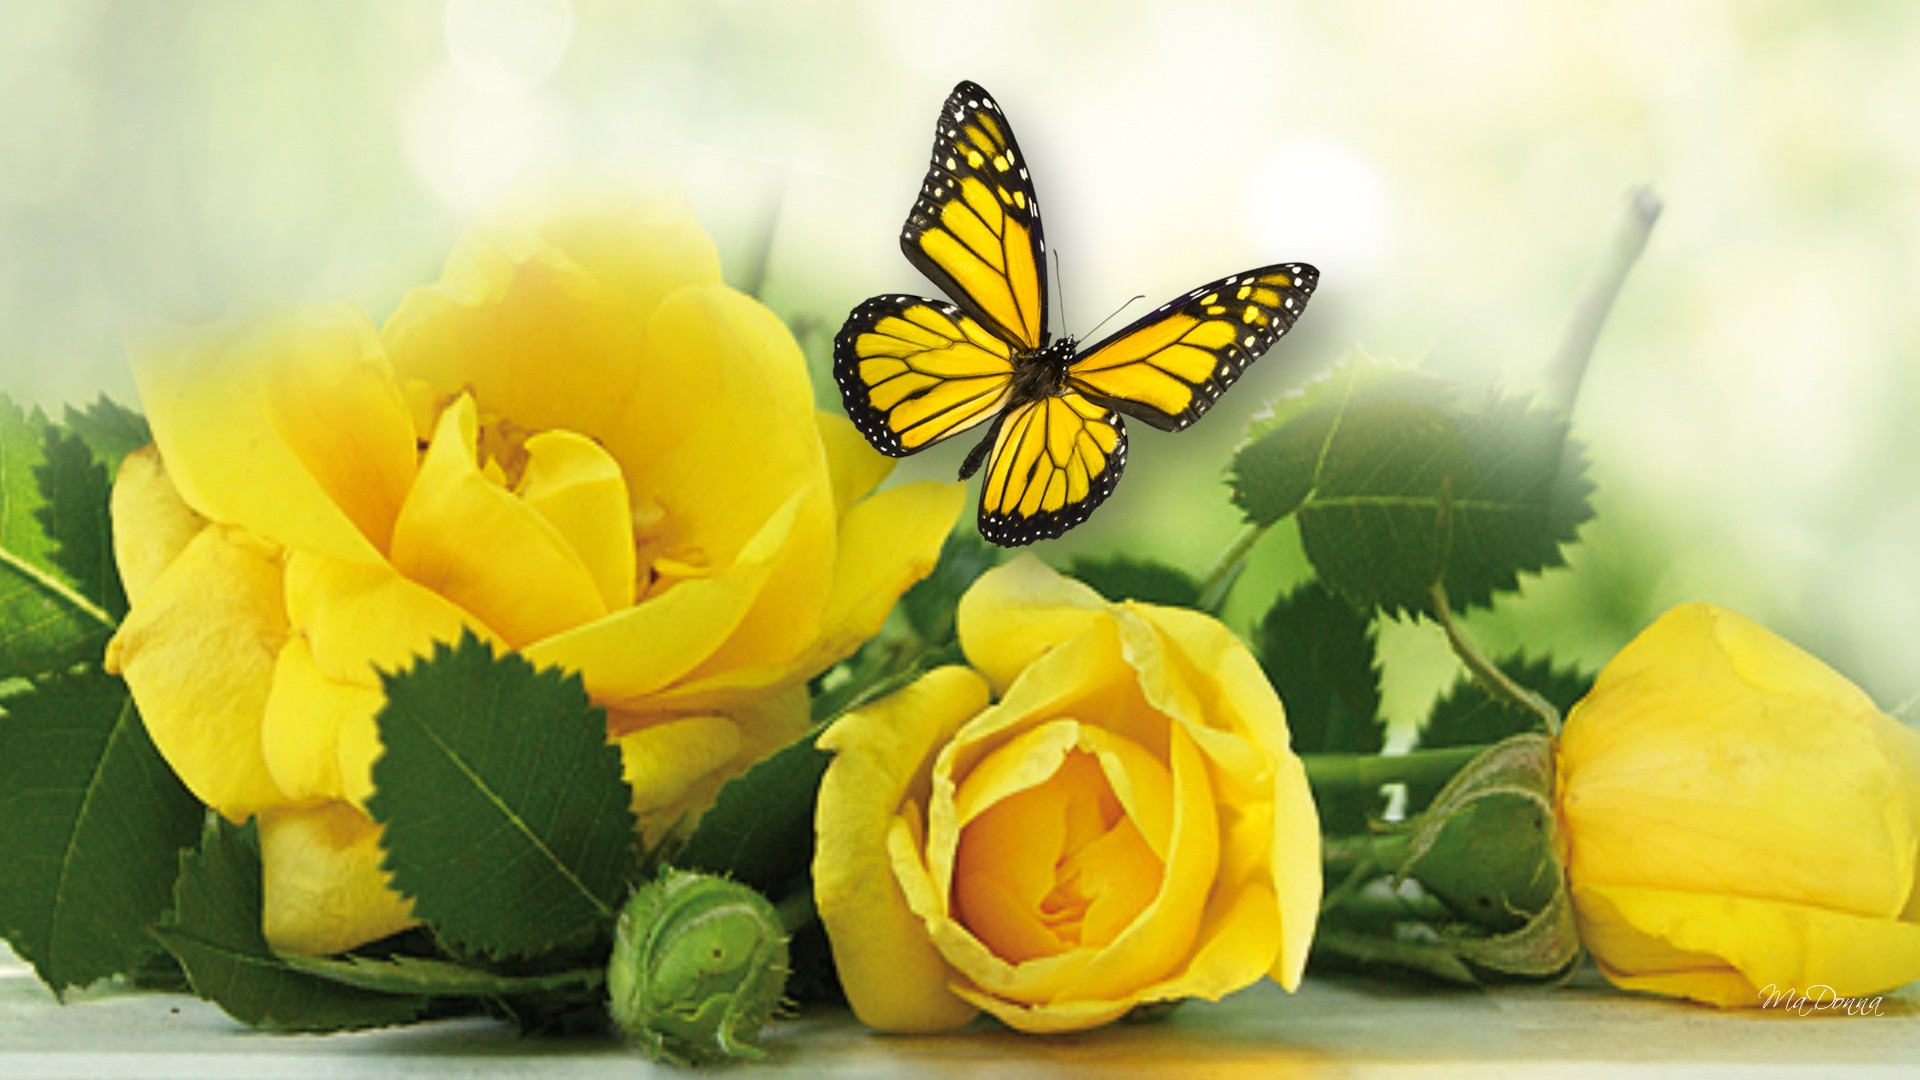 Yellow Roses Hd Wallpapers